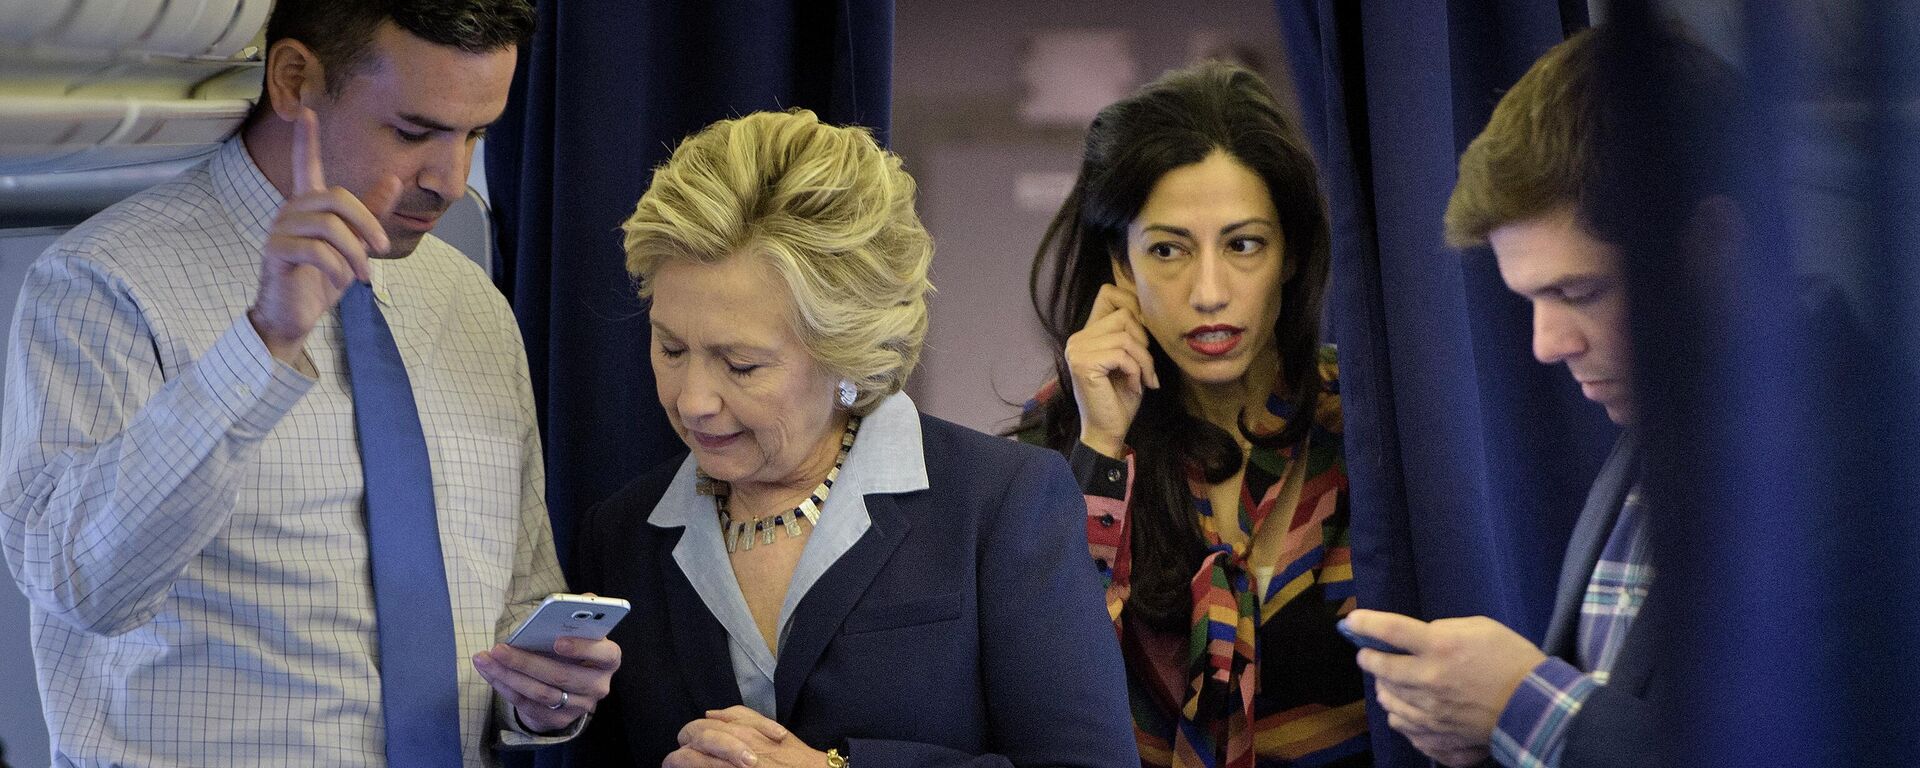 Democratic presidential nominee Hillary Clinton (2L) looks at national press secretary Brian Fallon's (L) smart phone while on her plane with aid Huma Abedin (2R) and traveling press secretary Nick Merrill (R) at Westchester County Airport October 3, 2016 in White Plains, New York - Sputnik International, 1920, 13.05.2022